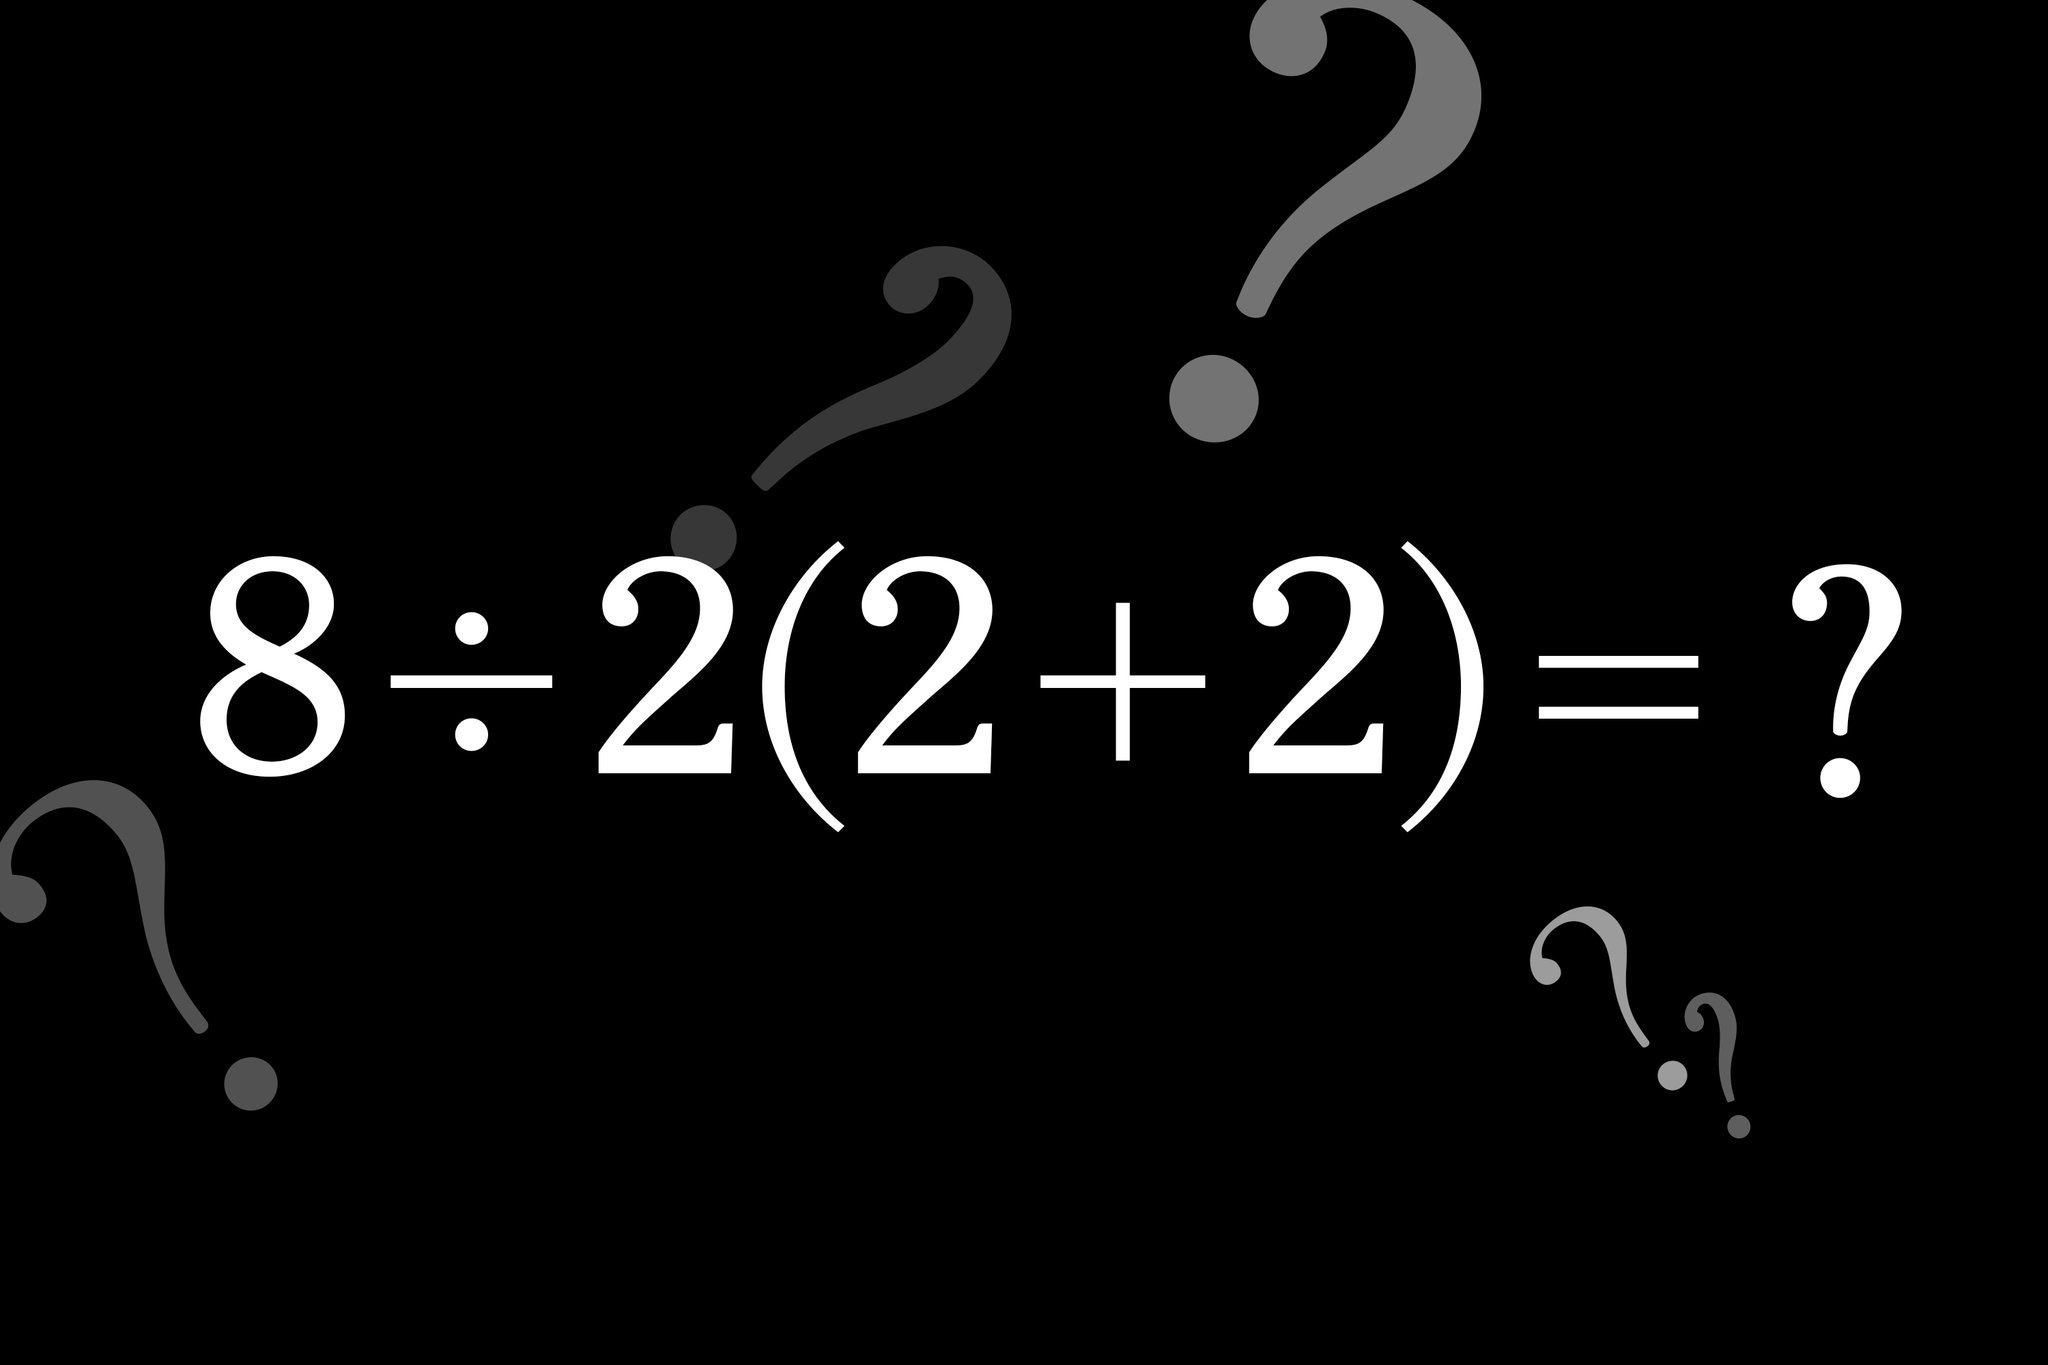 viral-math-equation-that-stumped-the-internet-how-do-you-solve-this